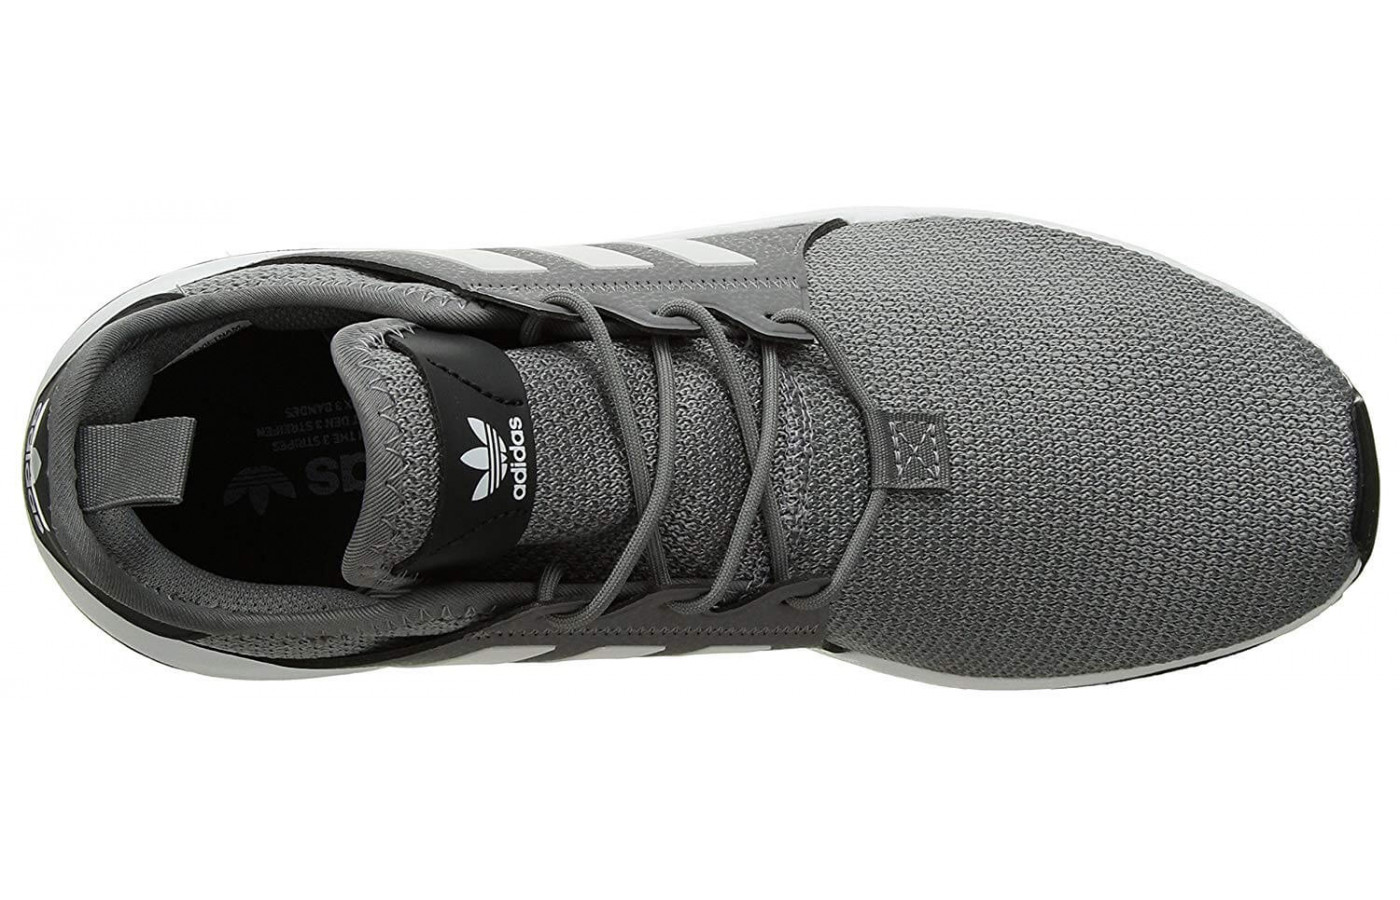 The Adidas X_PLR has a speed lacing system with rubber stopper